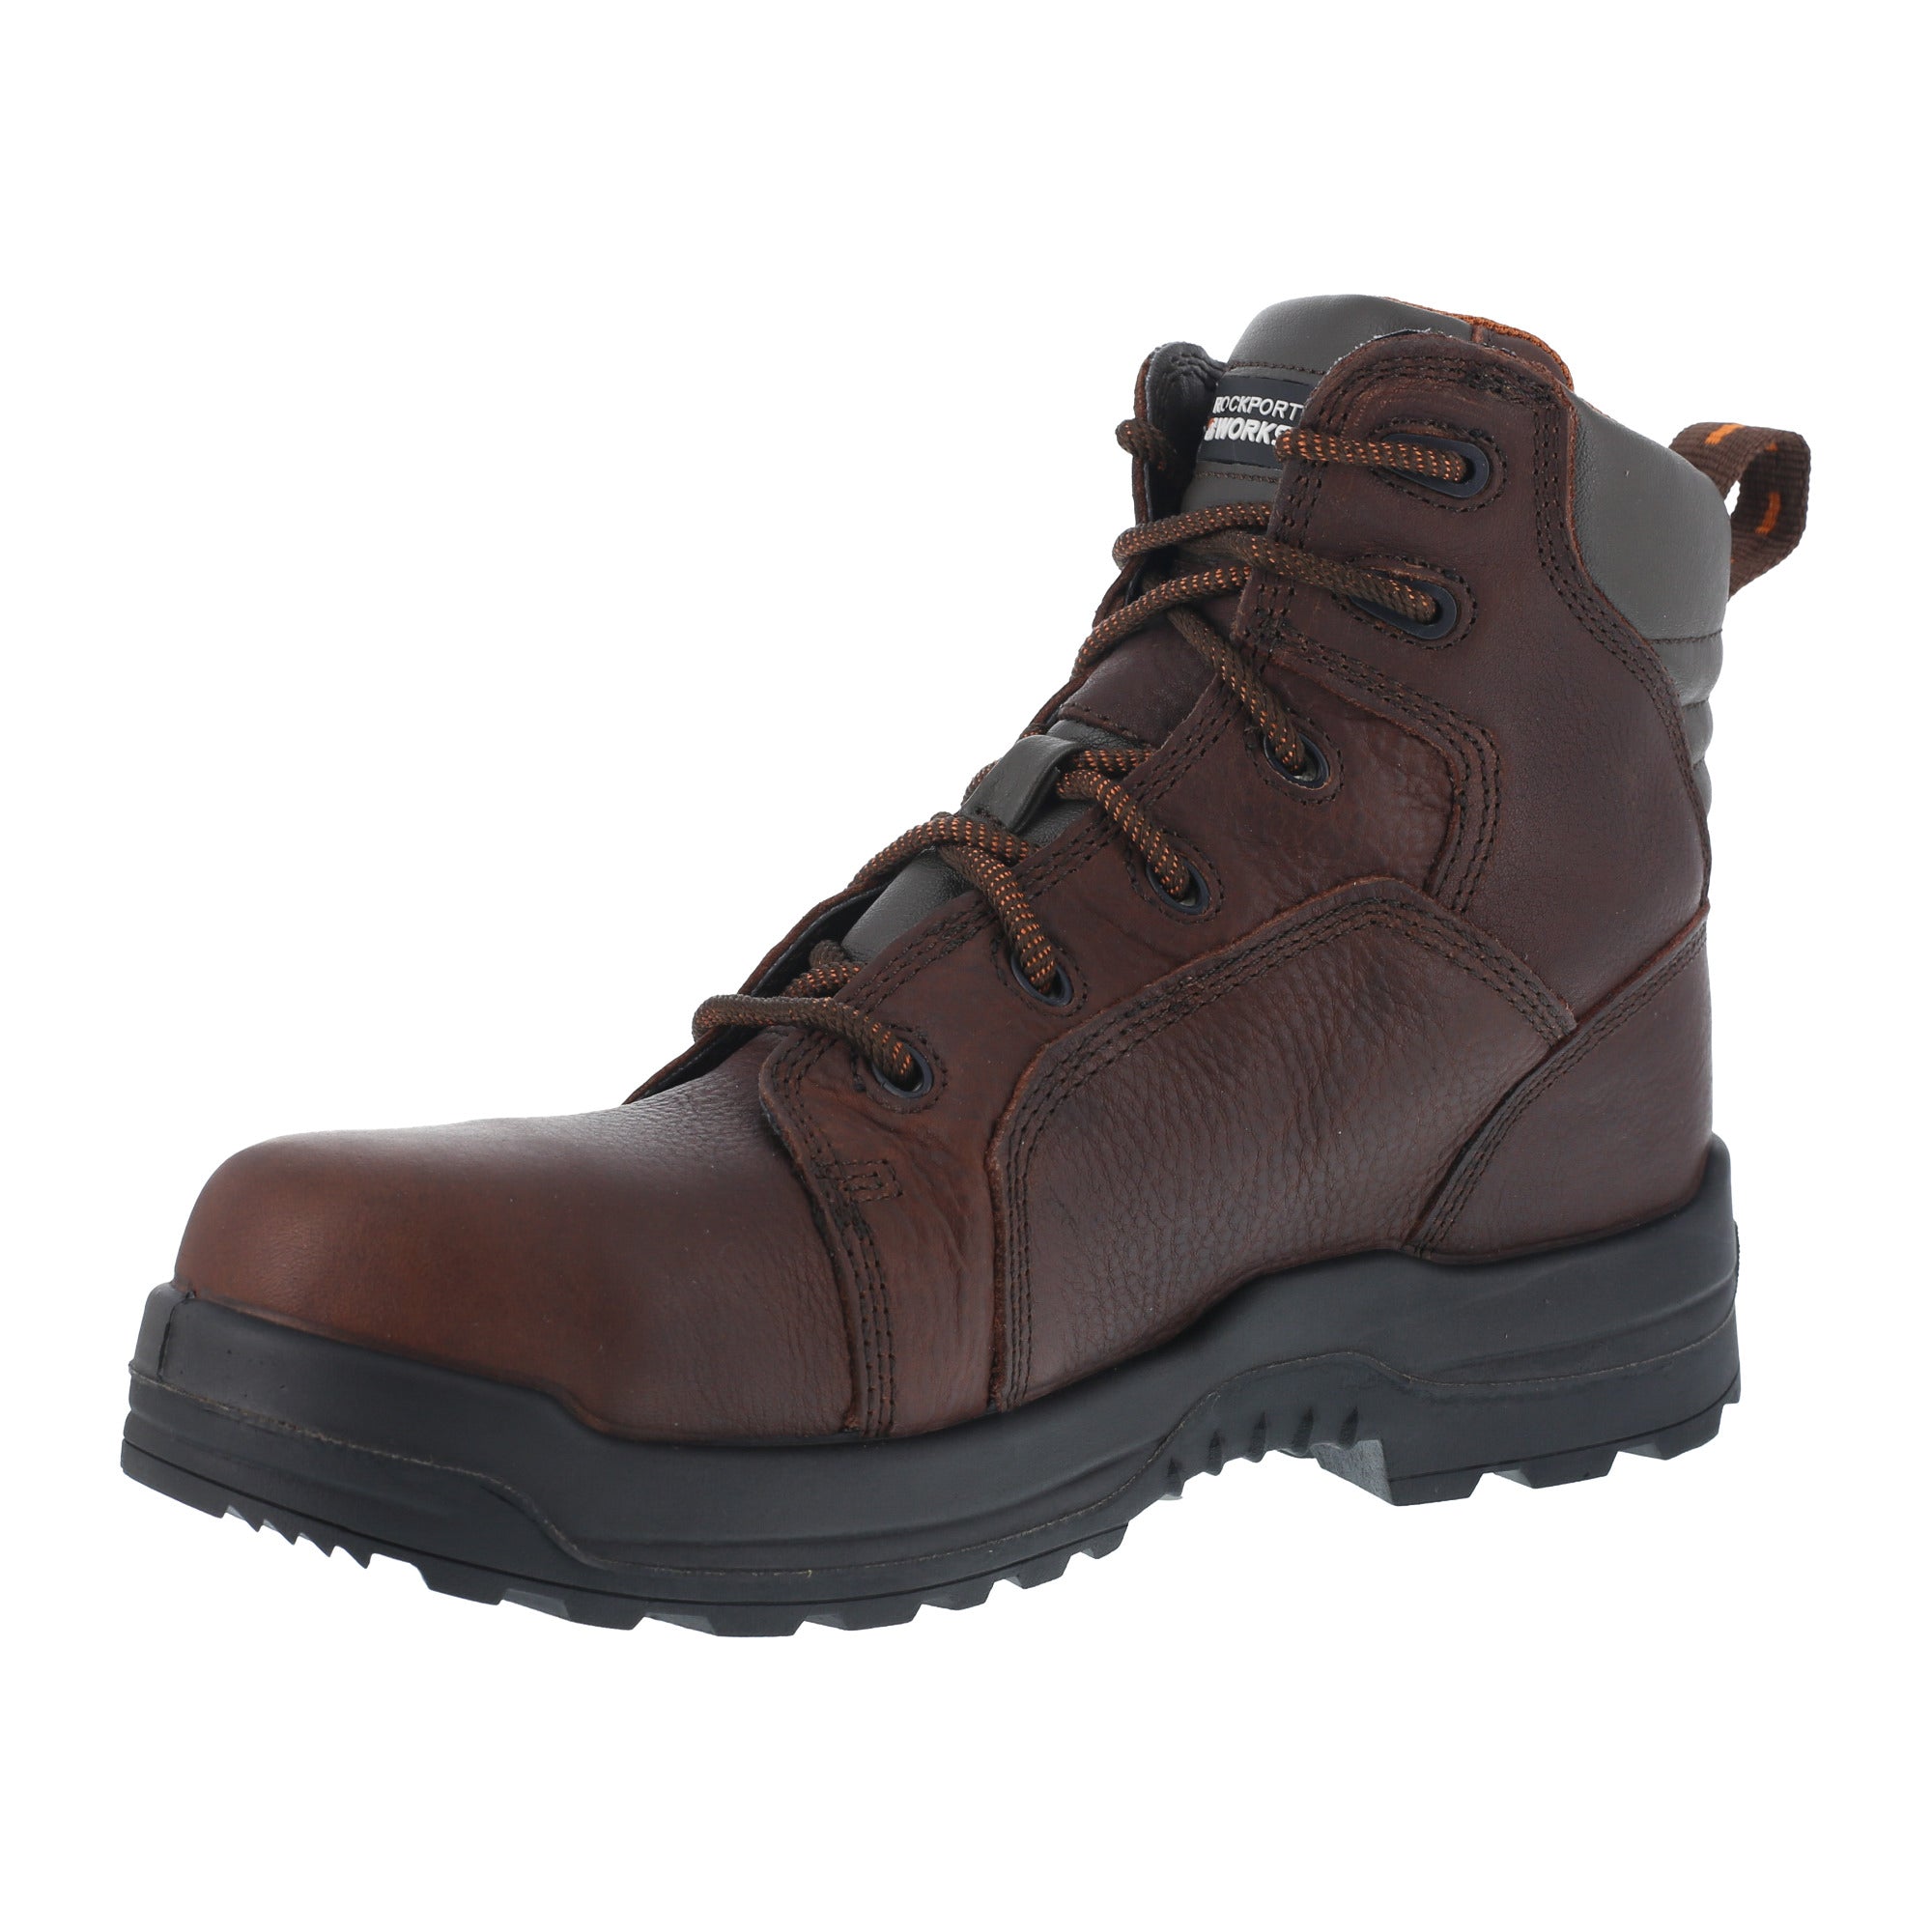 rockport work boots womens